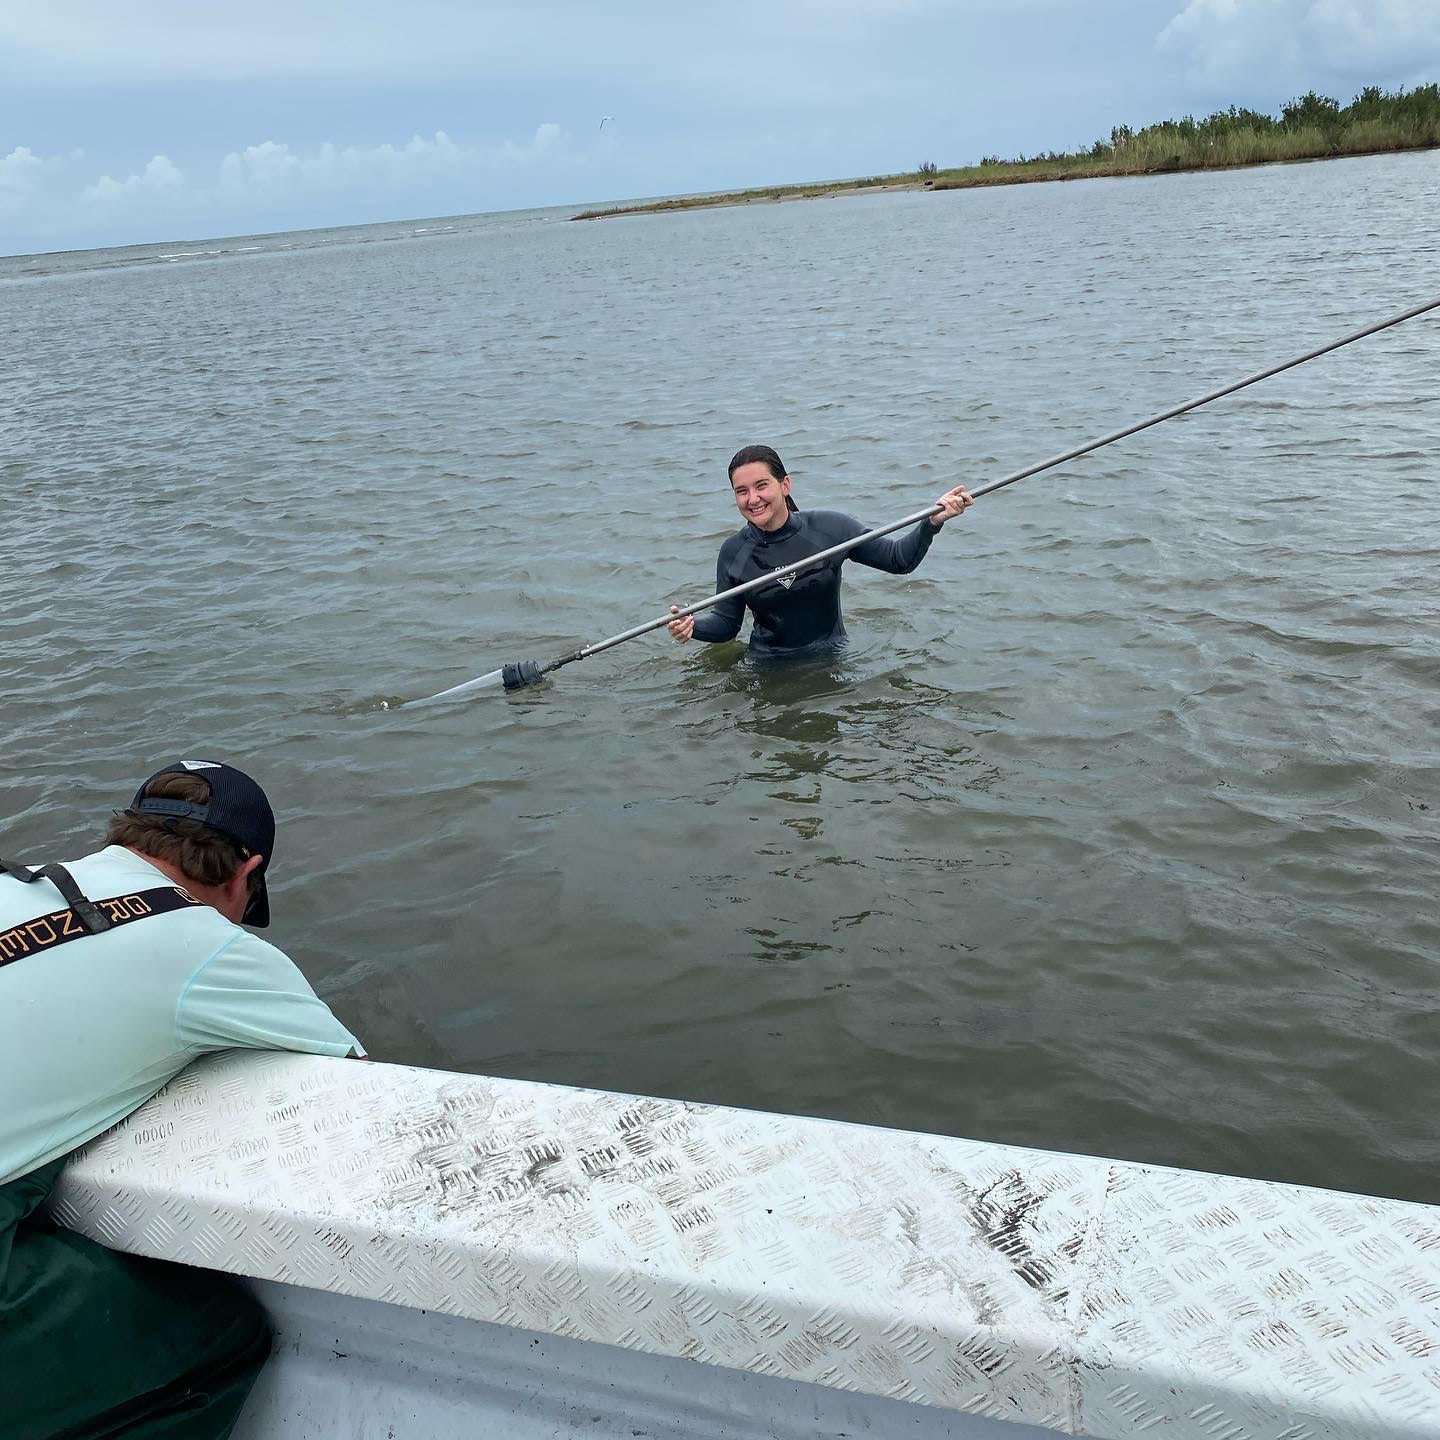 LSU researchers retrieve a core sample from the waters of the Gulf of Mexico